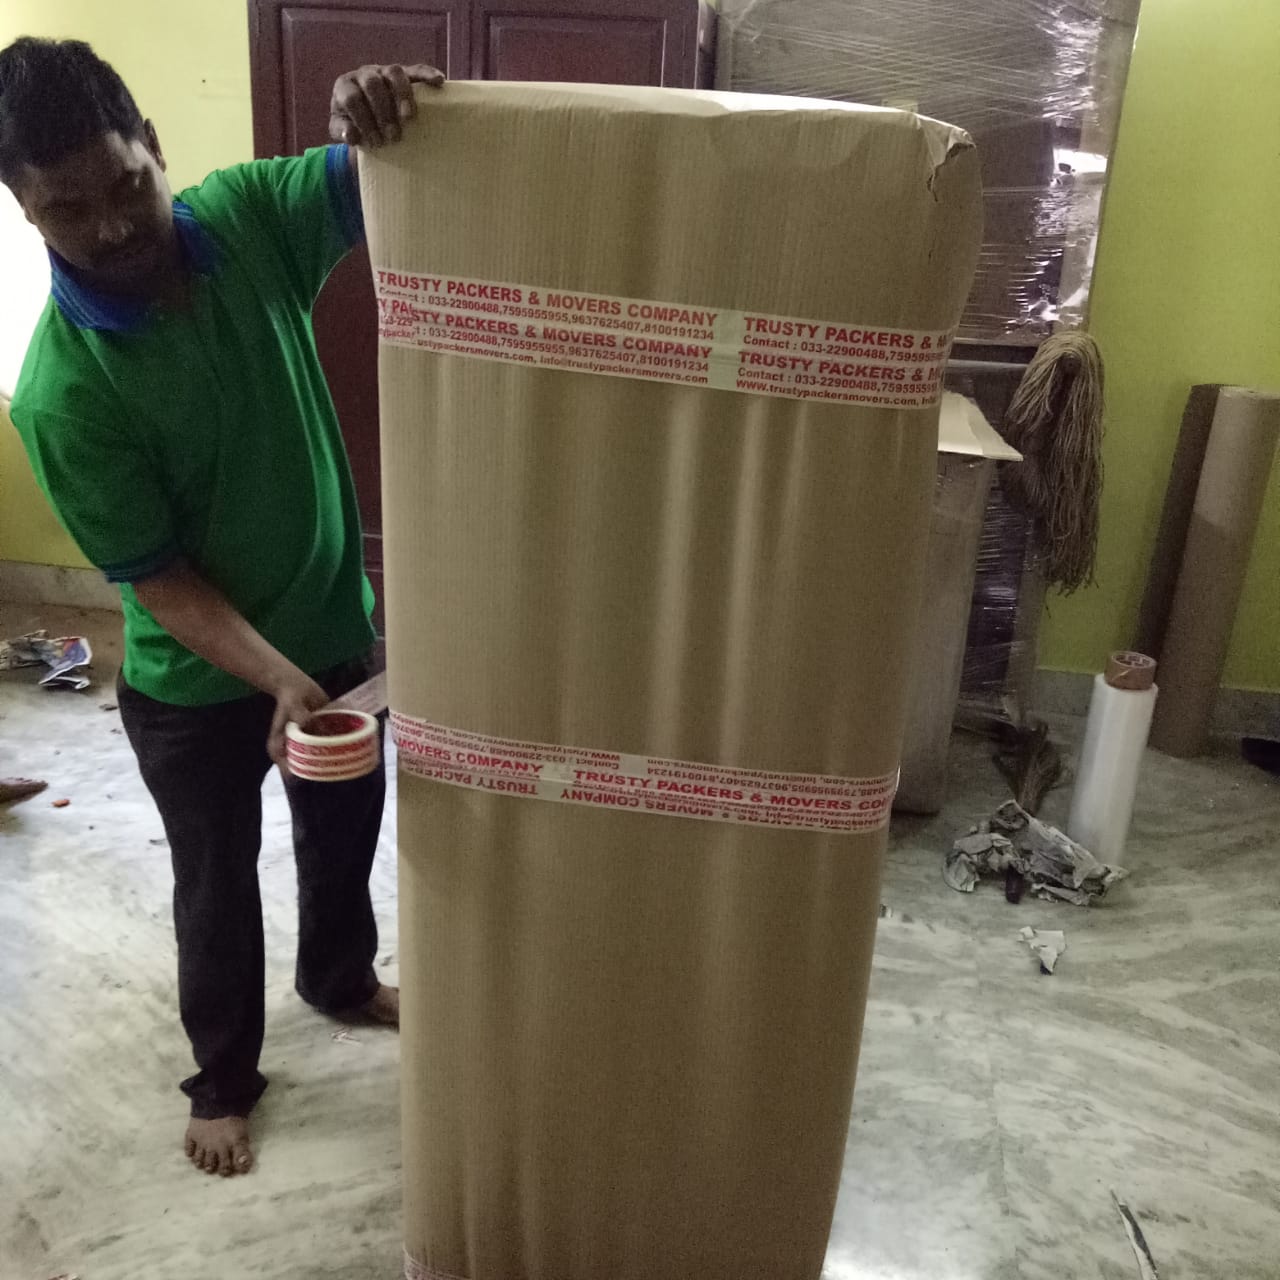 Local packers and movers in Pune